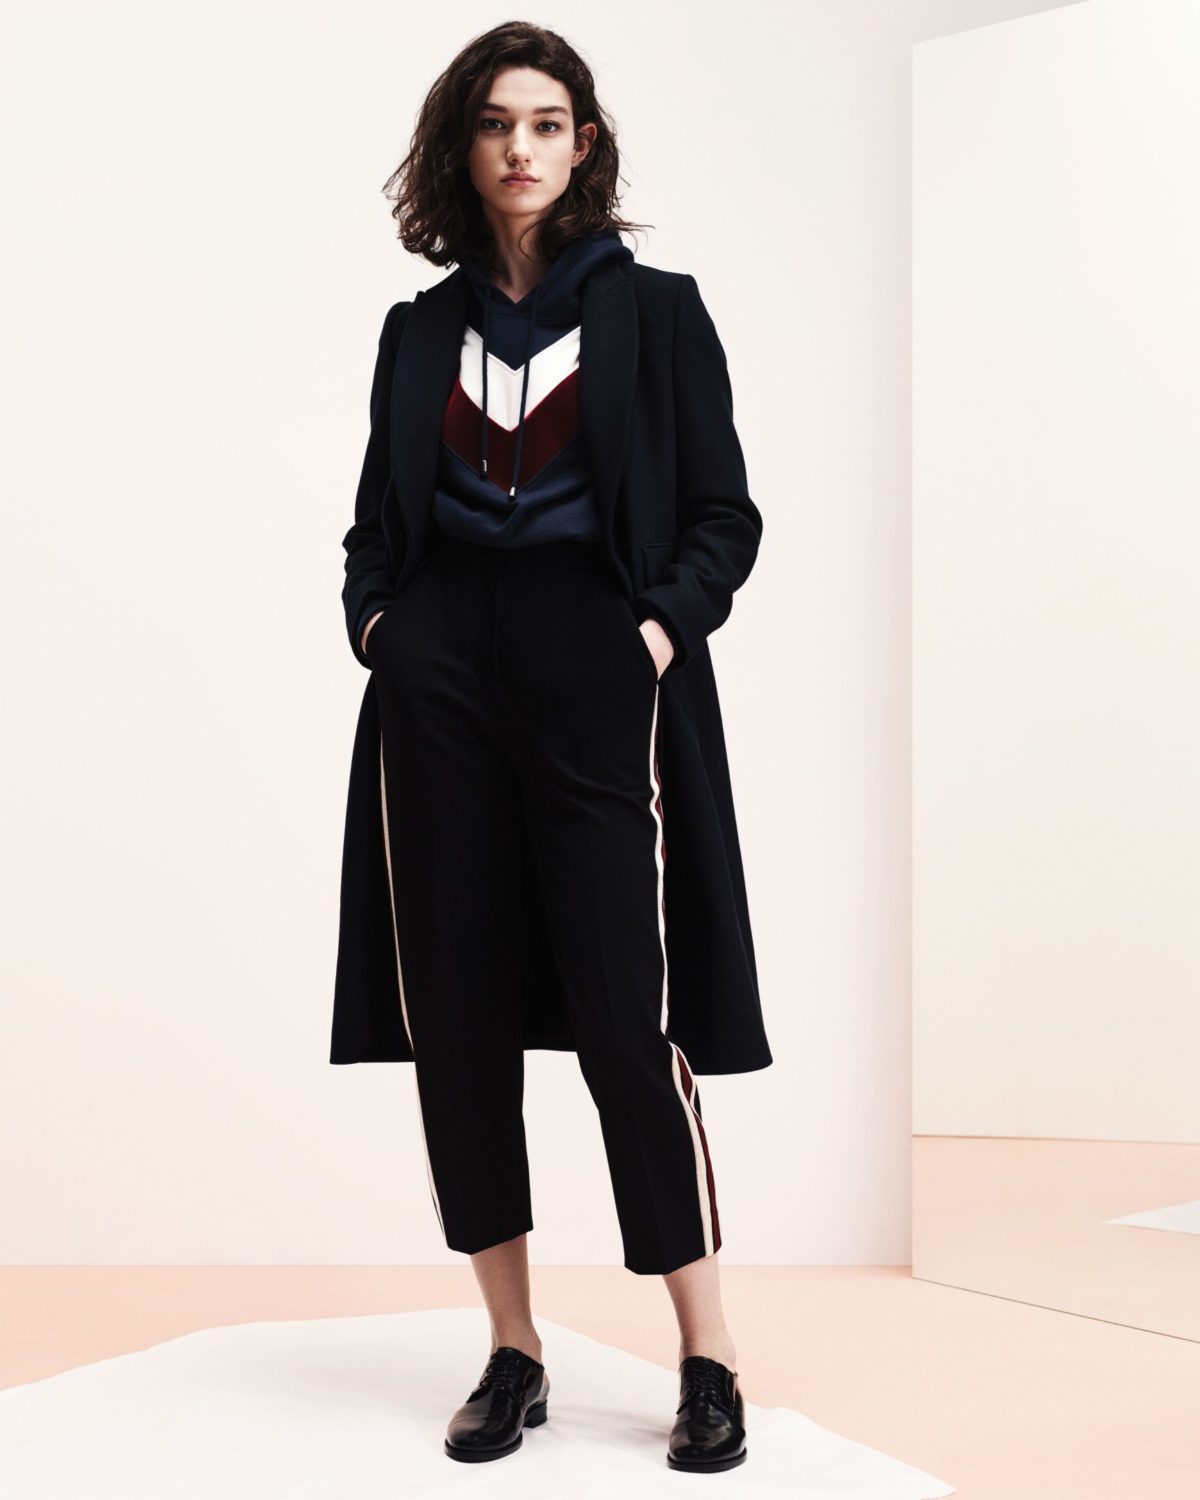 The Sisters Behind French-Inspired Labels Sandro and Maje - FASHION ...